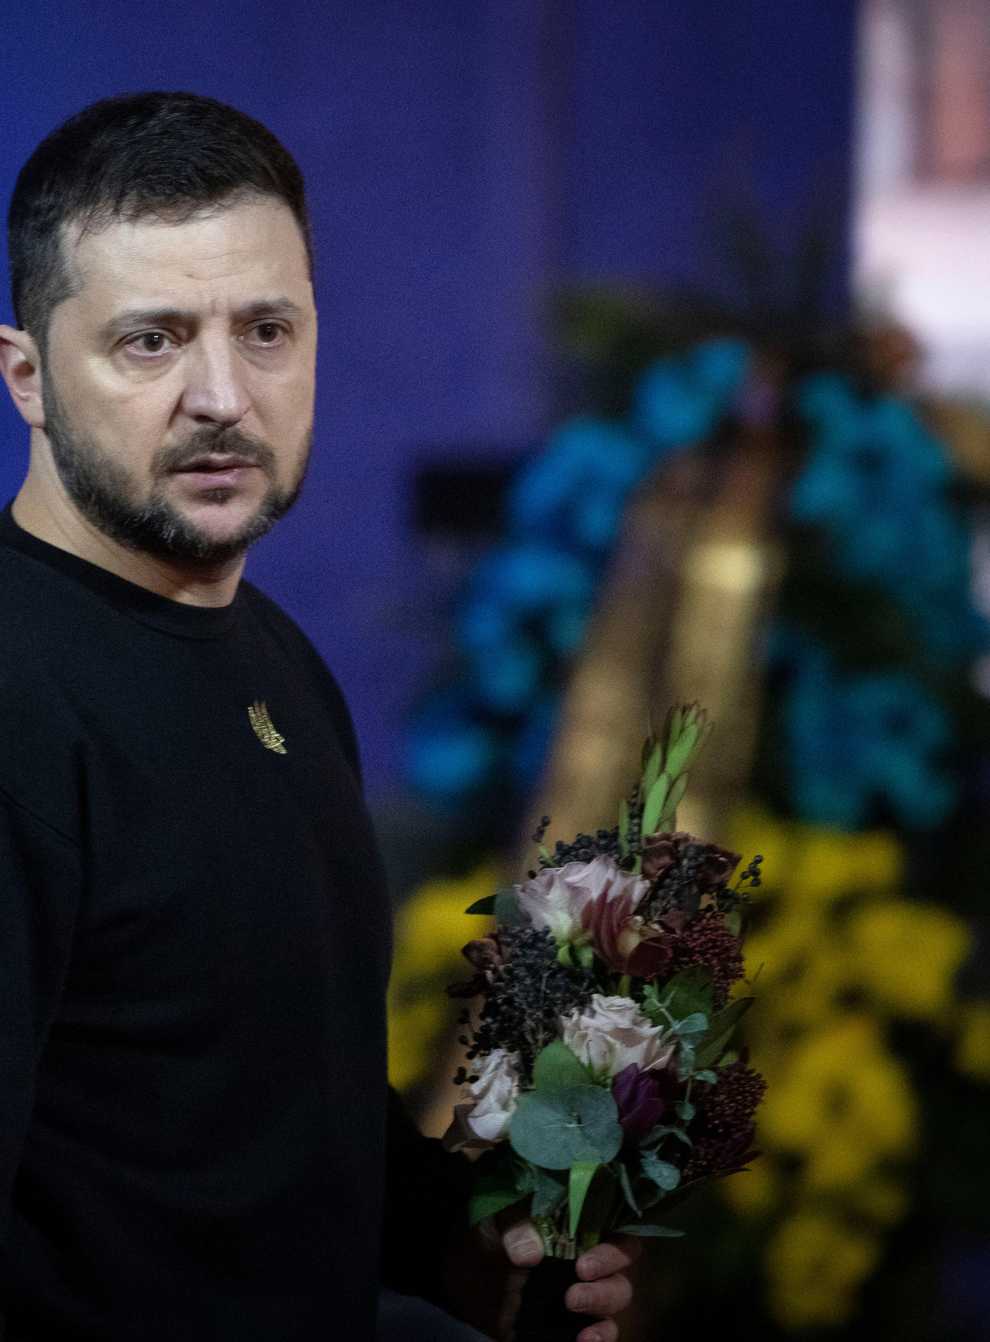 Ukrainian President Volodymyr Zelenskyy pays his respects to victims of a deadly helicopter crash during a farewell ceremony in Kyiv, Ukraine, Saturday, Jan. 21, 2023. Interior Minister Denys Monastyrsky, his Deputy Yevhen Yenin, State Secretary Yurii Lubkovych, national police official and the three crew members were killed in a helicopter crash on Wednesday in Kyiv suburbs of Brovary. (AP Photo/Efrem Lukatsky)